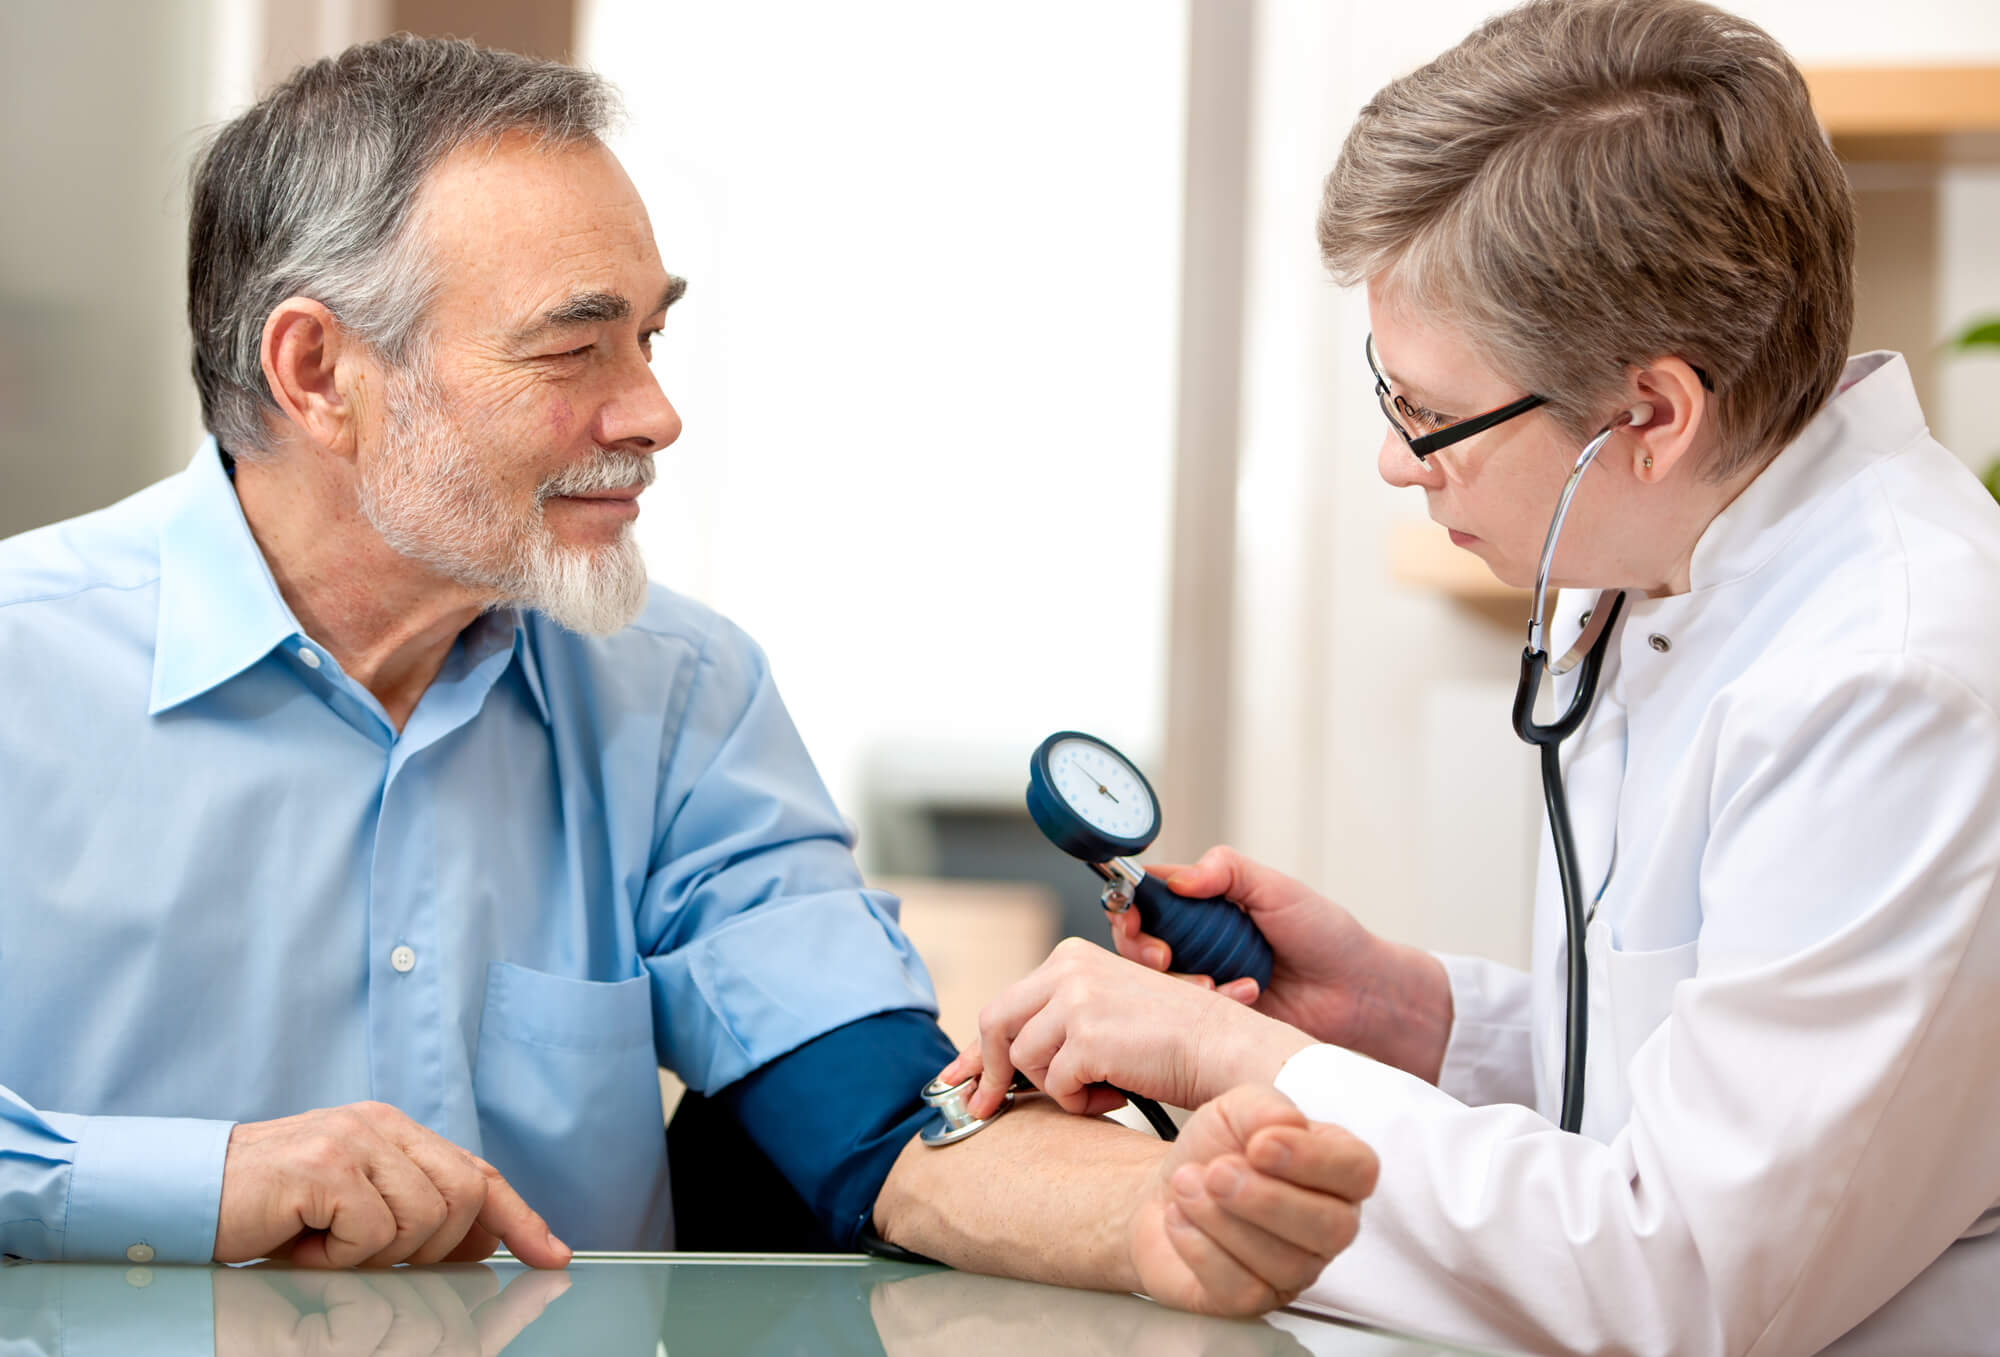 A doctor measures the blood pressure of a male patient. There is no evidence linking TRT to blood clotting events, but preventative monitoring represents best practices.